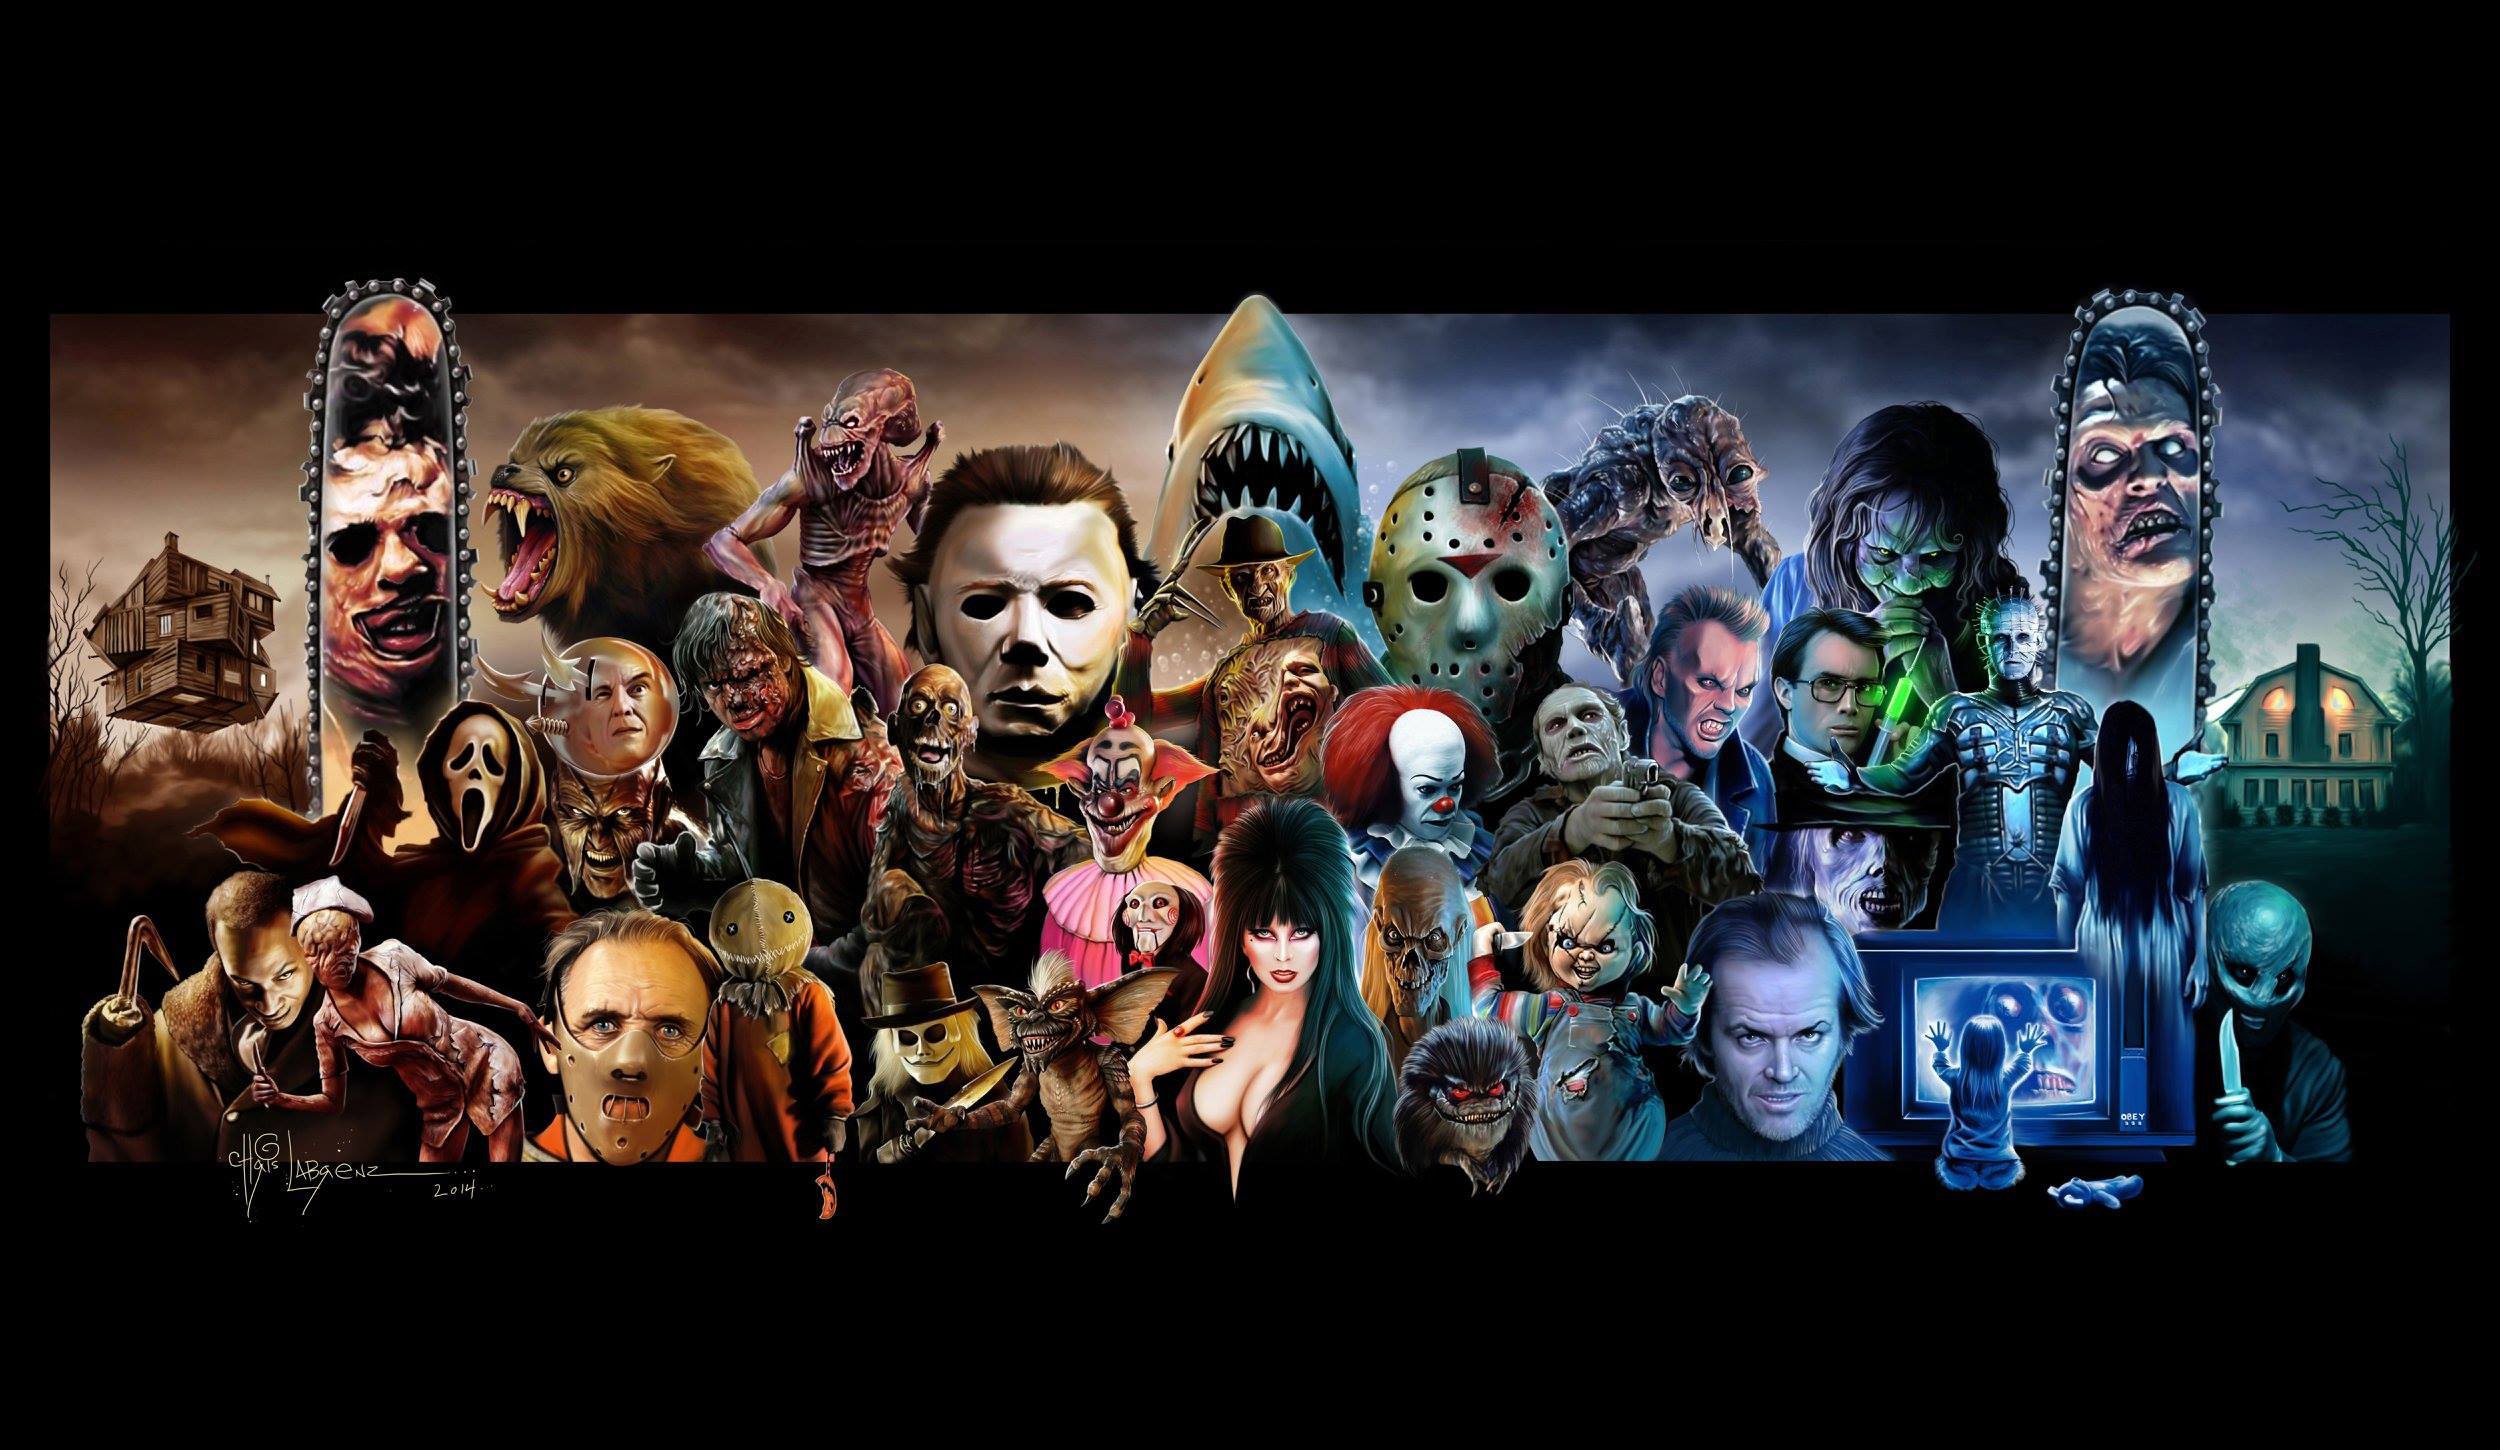 General 2500x1450 horror artwork movies collage 2014 (Year) Hannibal Lecter Chucky leatherface ghostface Freddy Krueger Puppet Master Gremlins Jaws Jason Voorhees The Fly The Exorcist Pinhead (Hellraiser) Poltergeist Evil Dead Saw Crypt Keeper Re-Animator Herbert West (Re-Animator) sadako The Cabin in the Woods